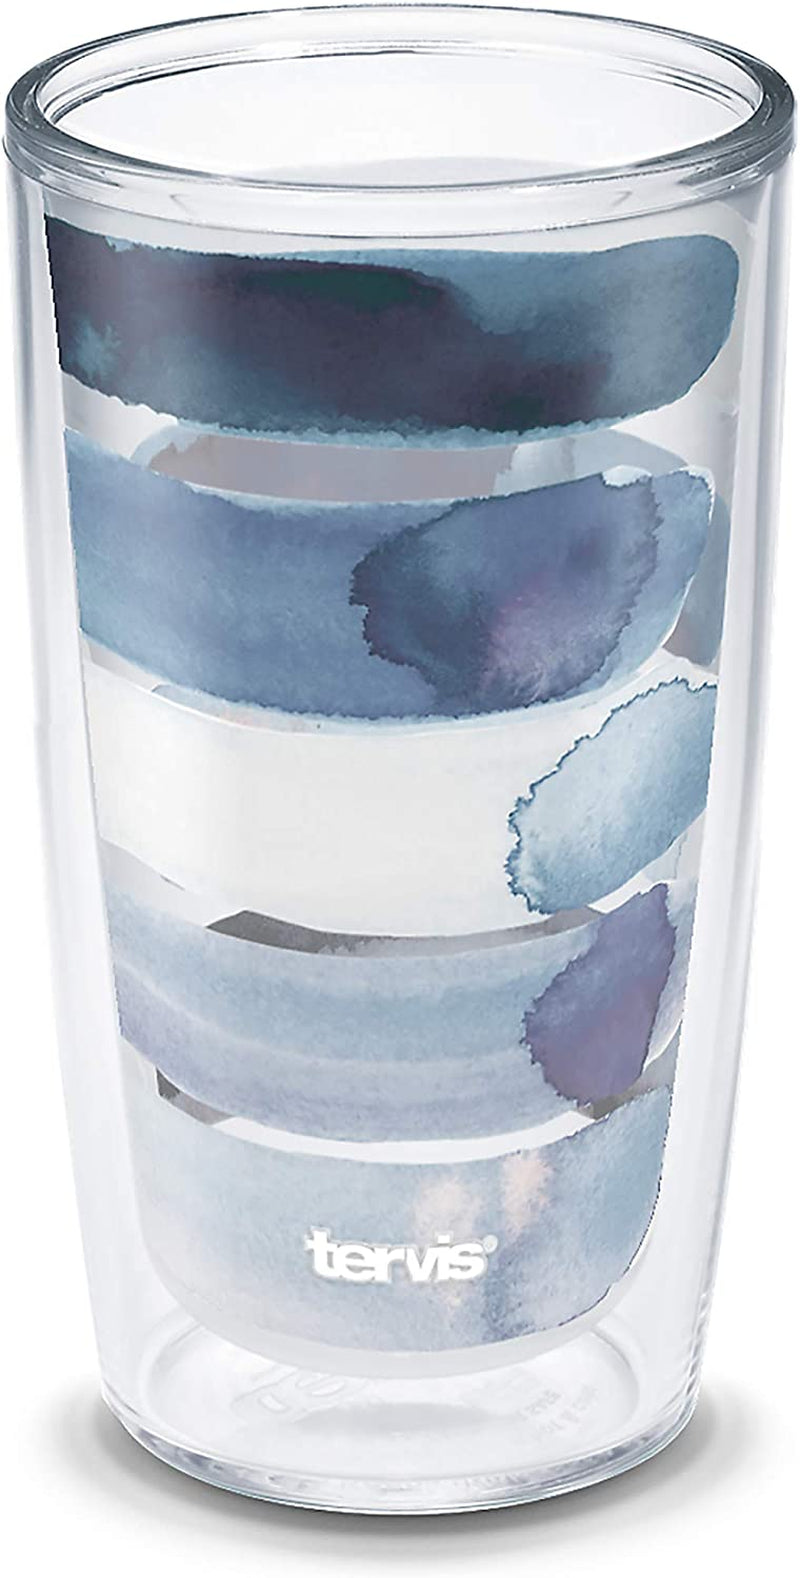 Tervis Made in USA Double Walled Kelly Ventura Insulated Tumbler Cup Keeps Drinks Cold & Hot, 16Oz 4Pk, Hillside Home & Garden > Kitchen & Dining > Tableware > Drinkware Tervis Sorbet Stripe 16oz 